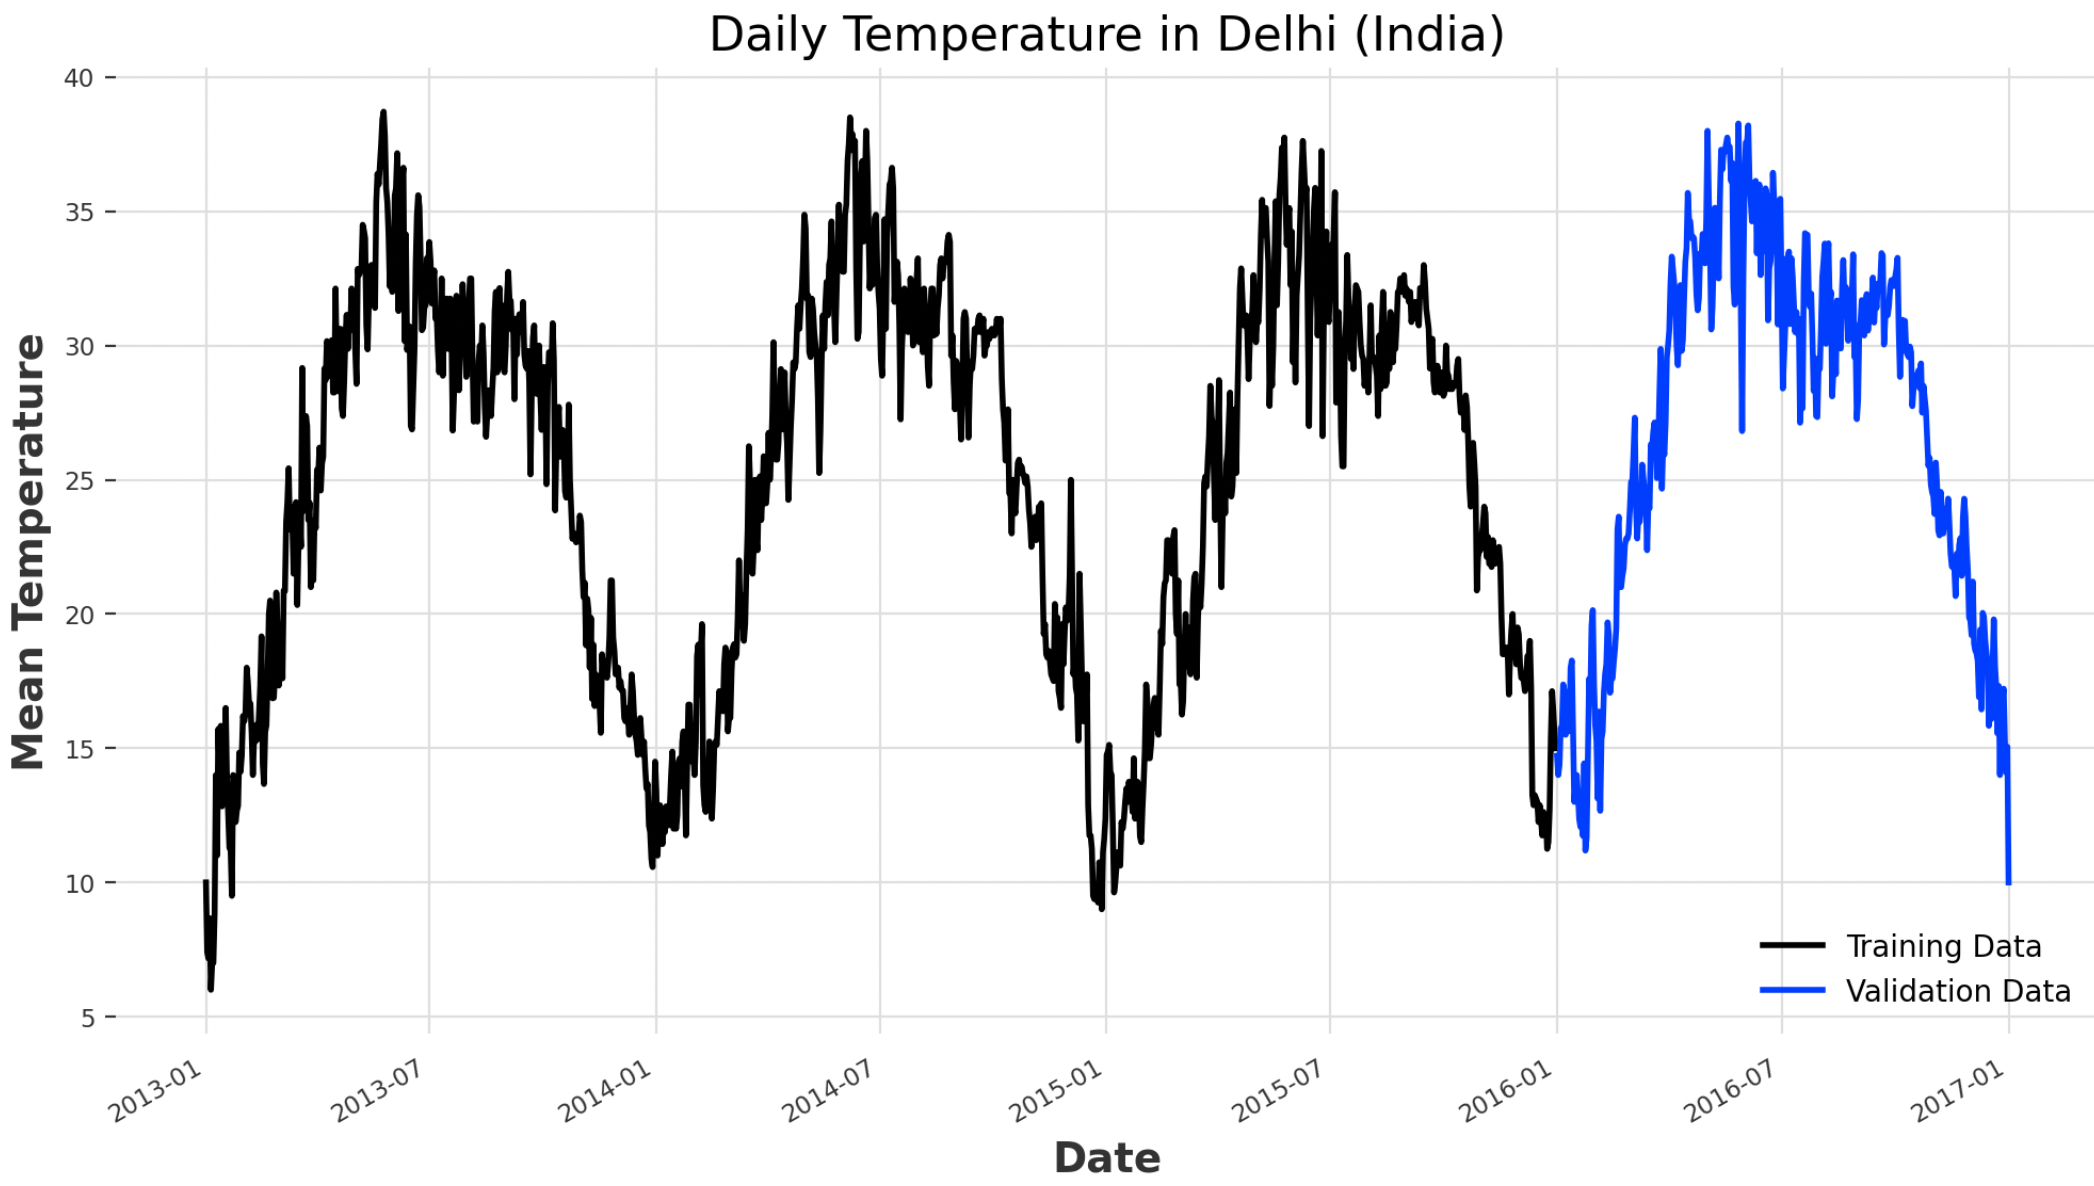 Figure 2: Daily Temperature in Delhi Time Series (Image by Author).